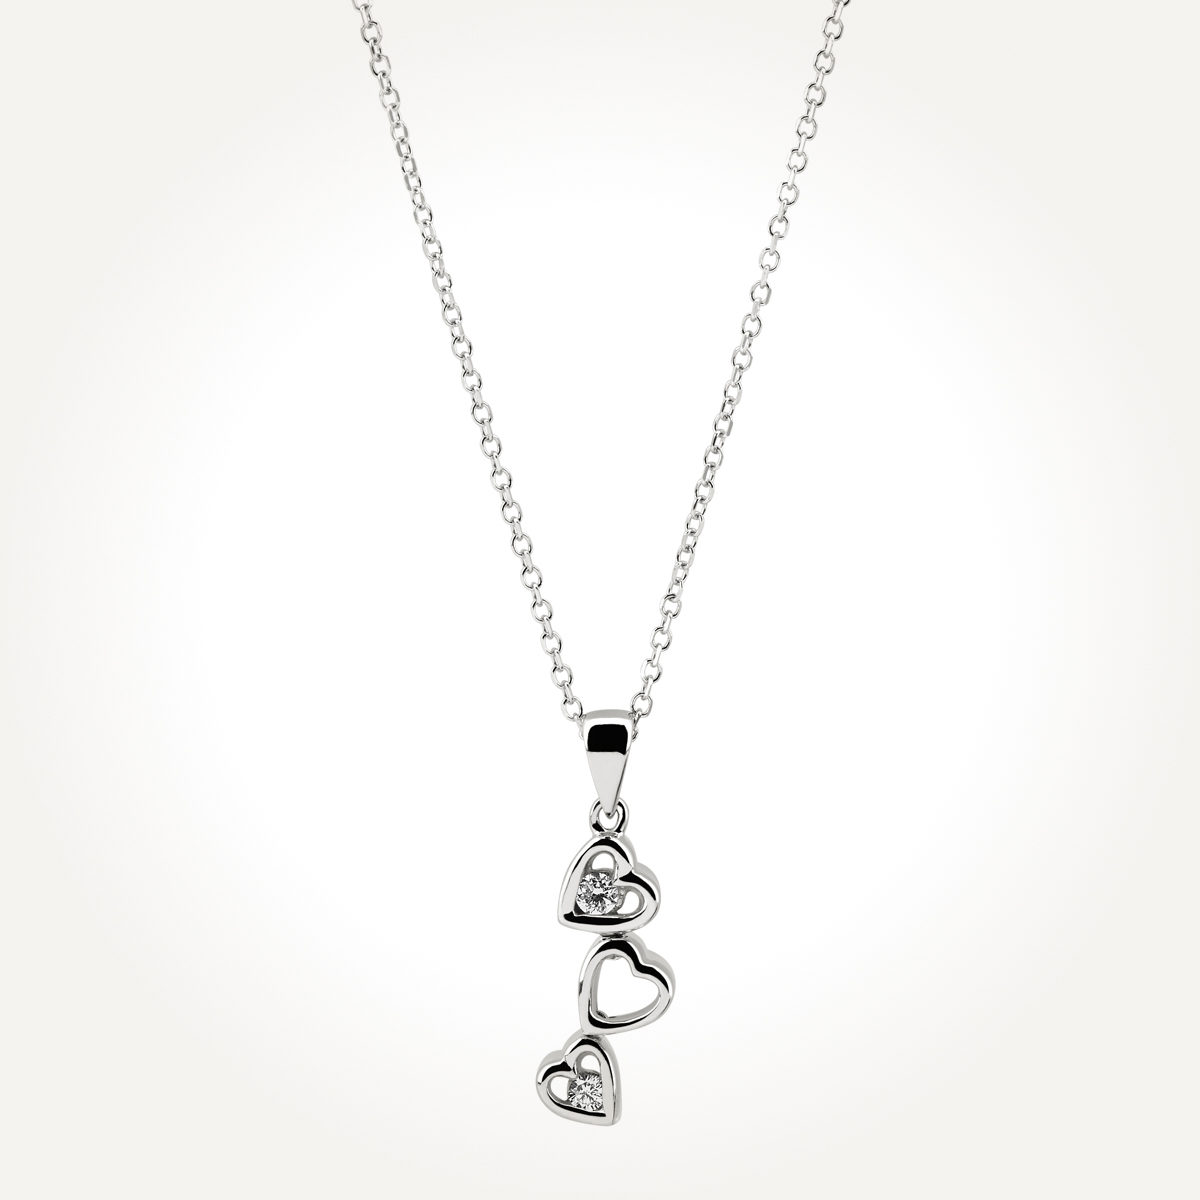 14KT White Gold Tri Heart Necklace